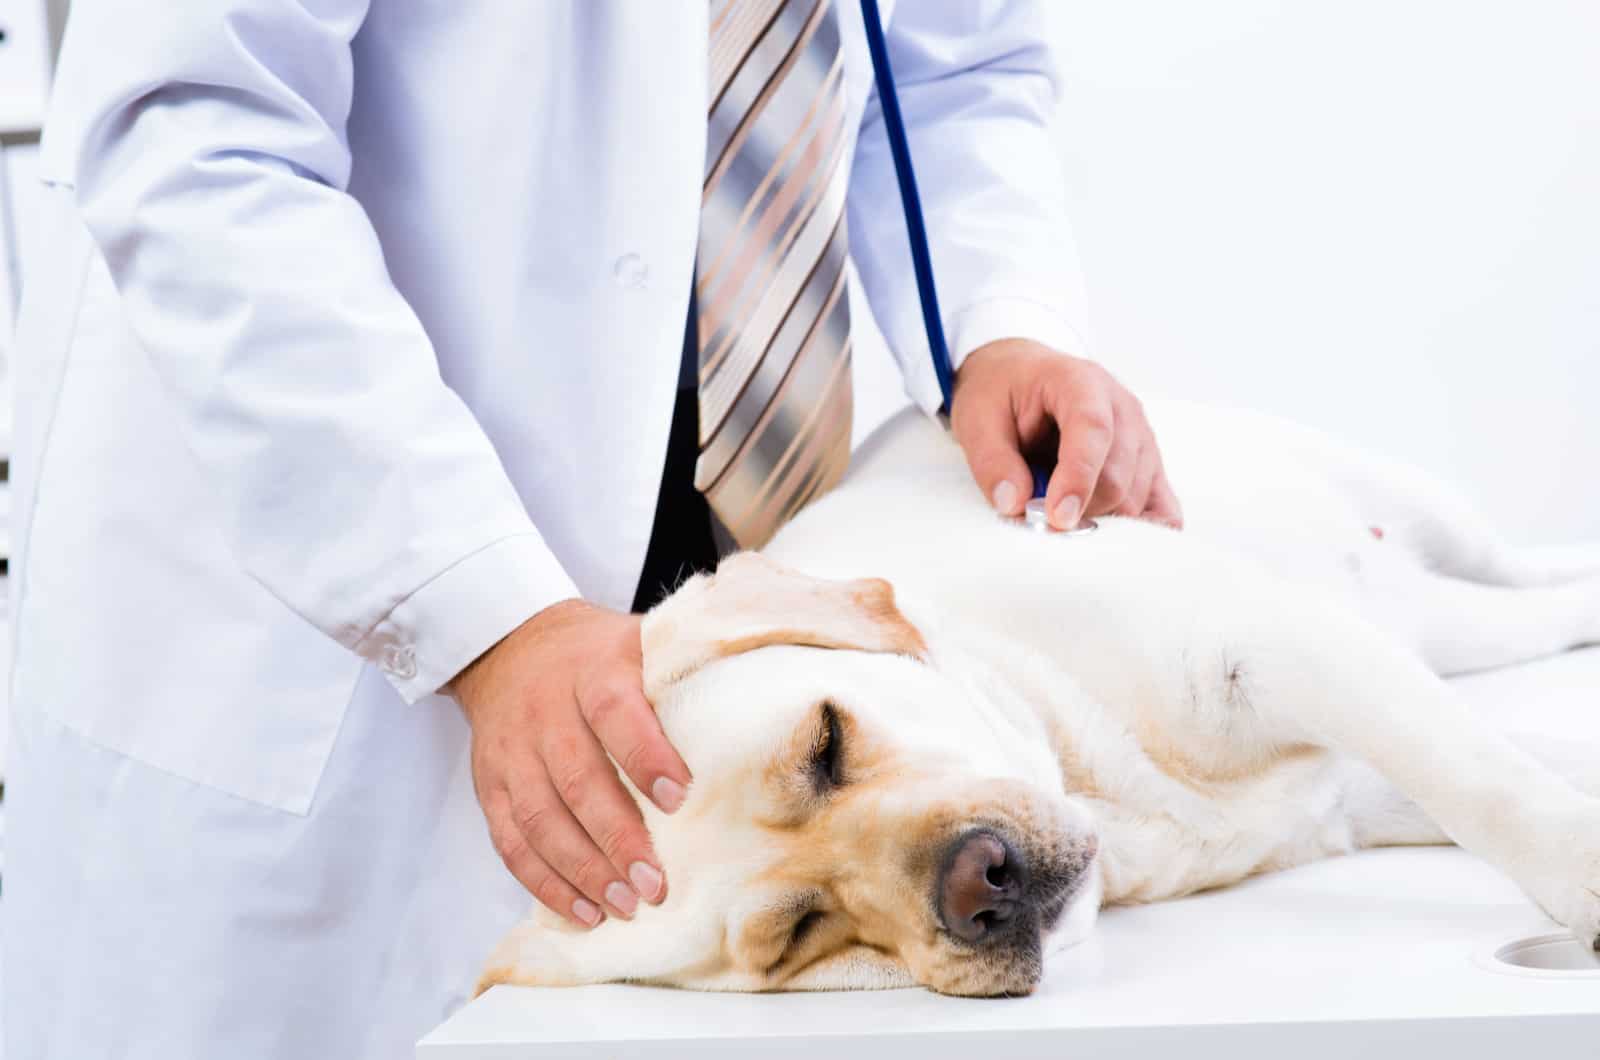 the vet examines the dog on the table